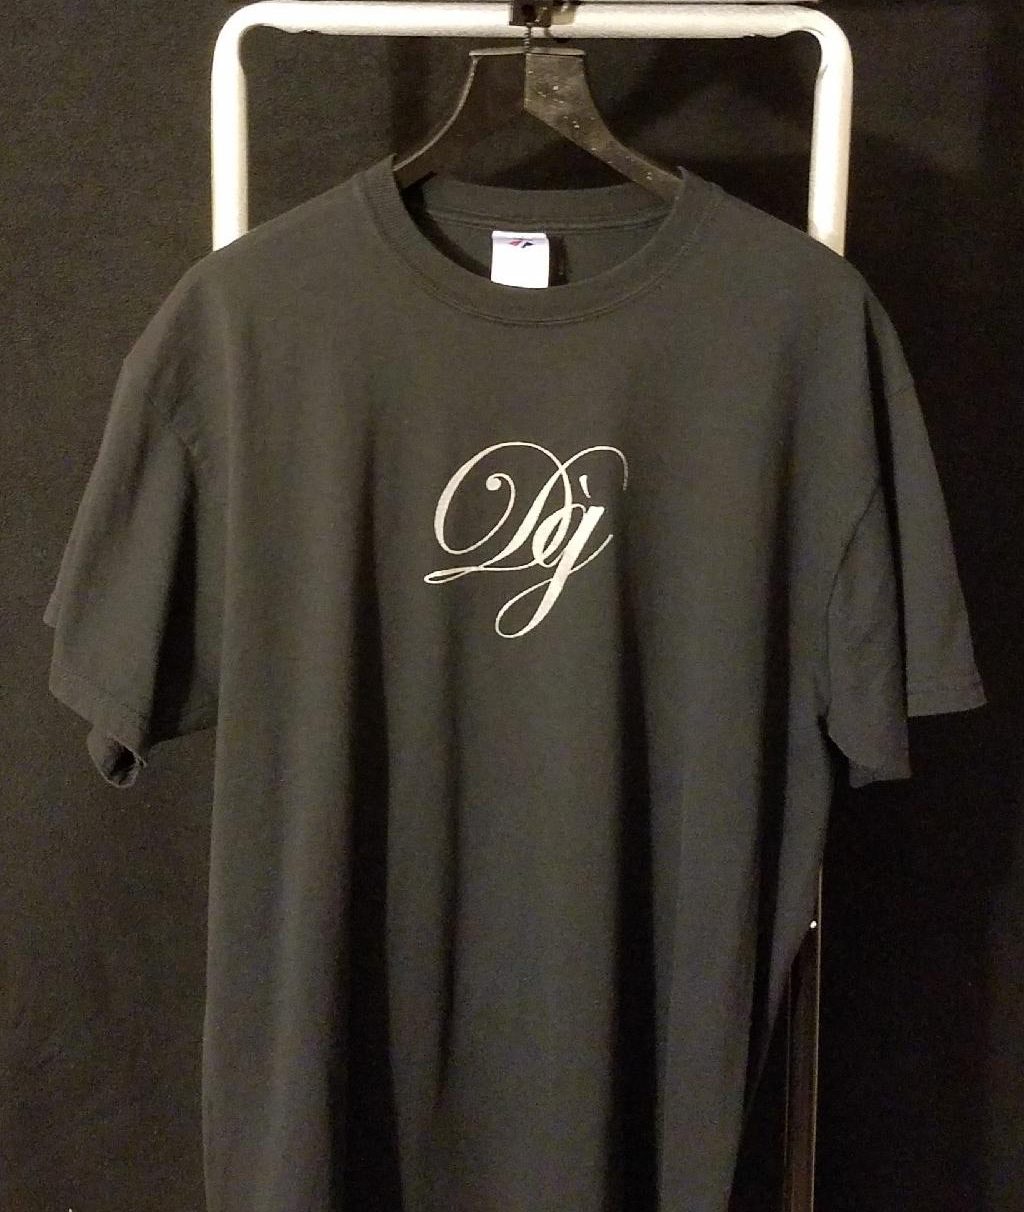 dry fit tee shirts